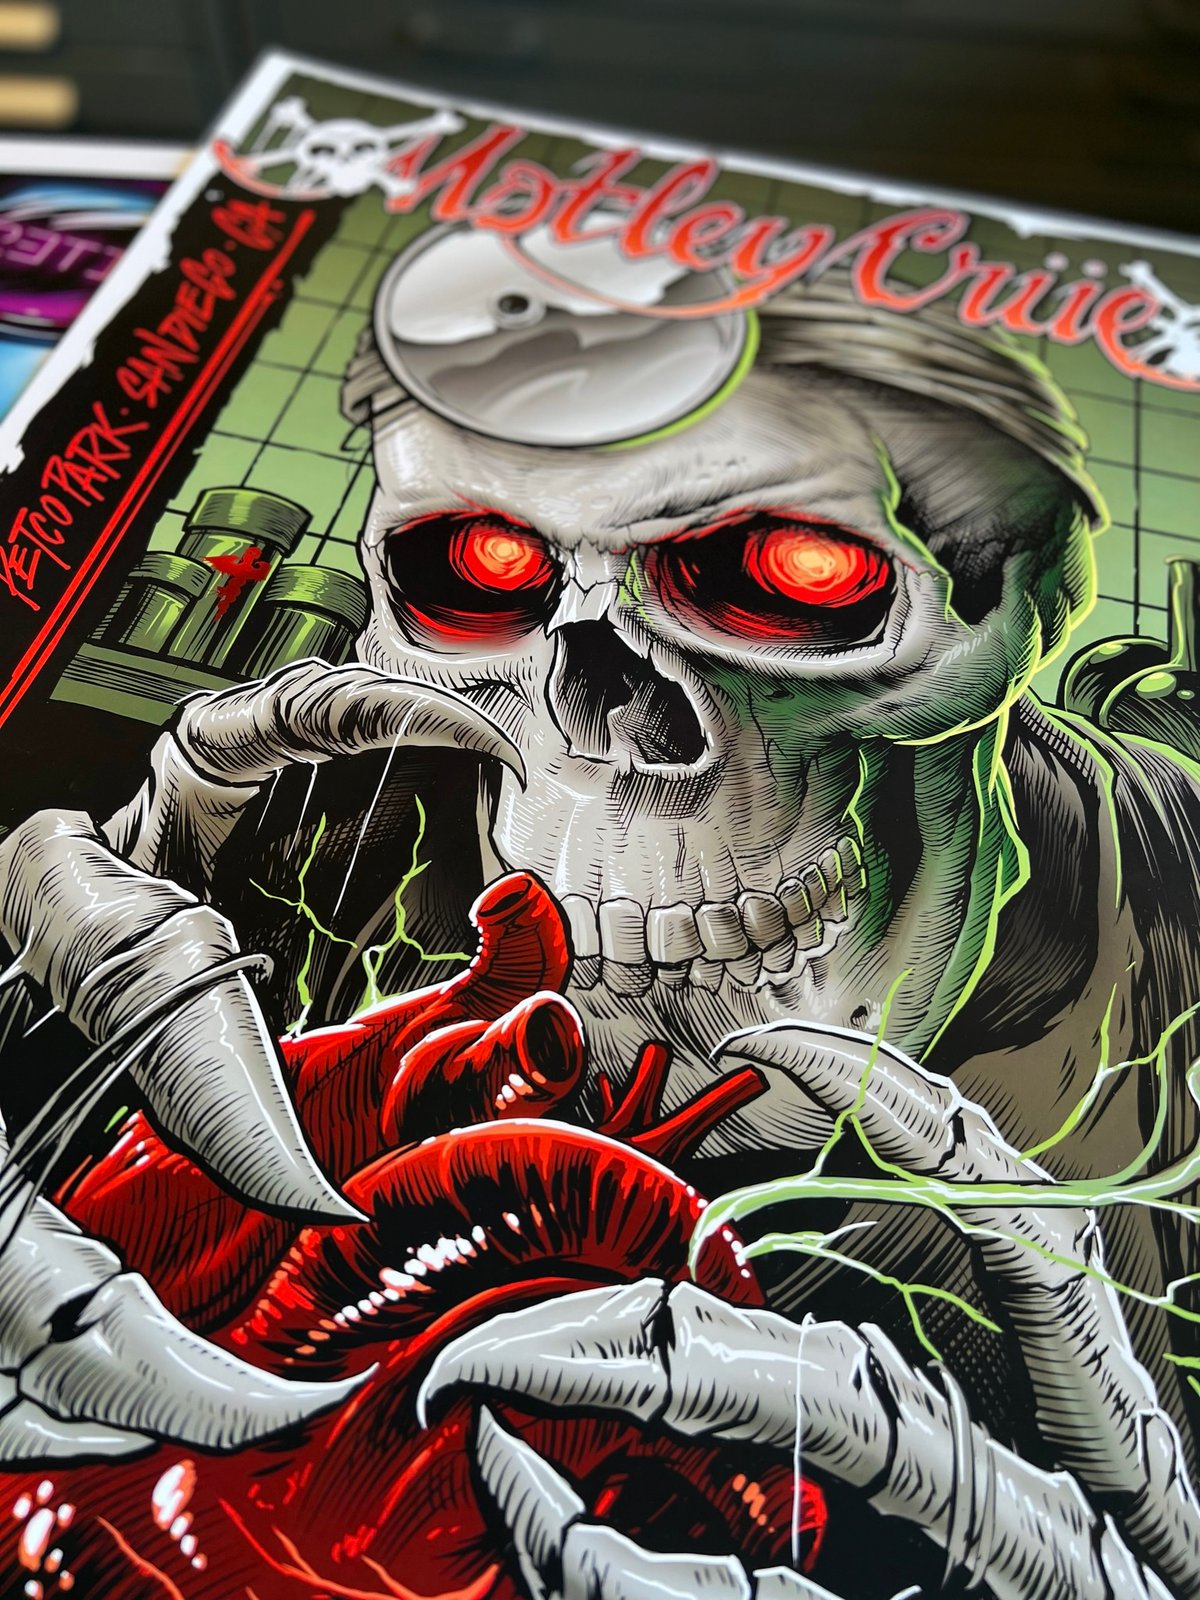 Motley Crue and Def Leppard San Diego Posters